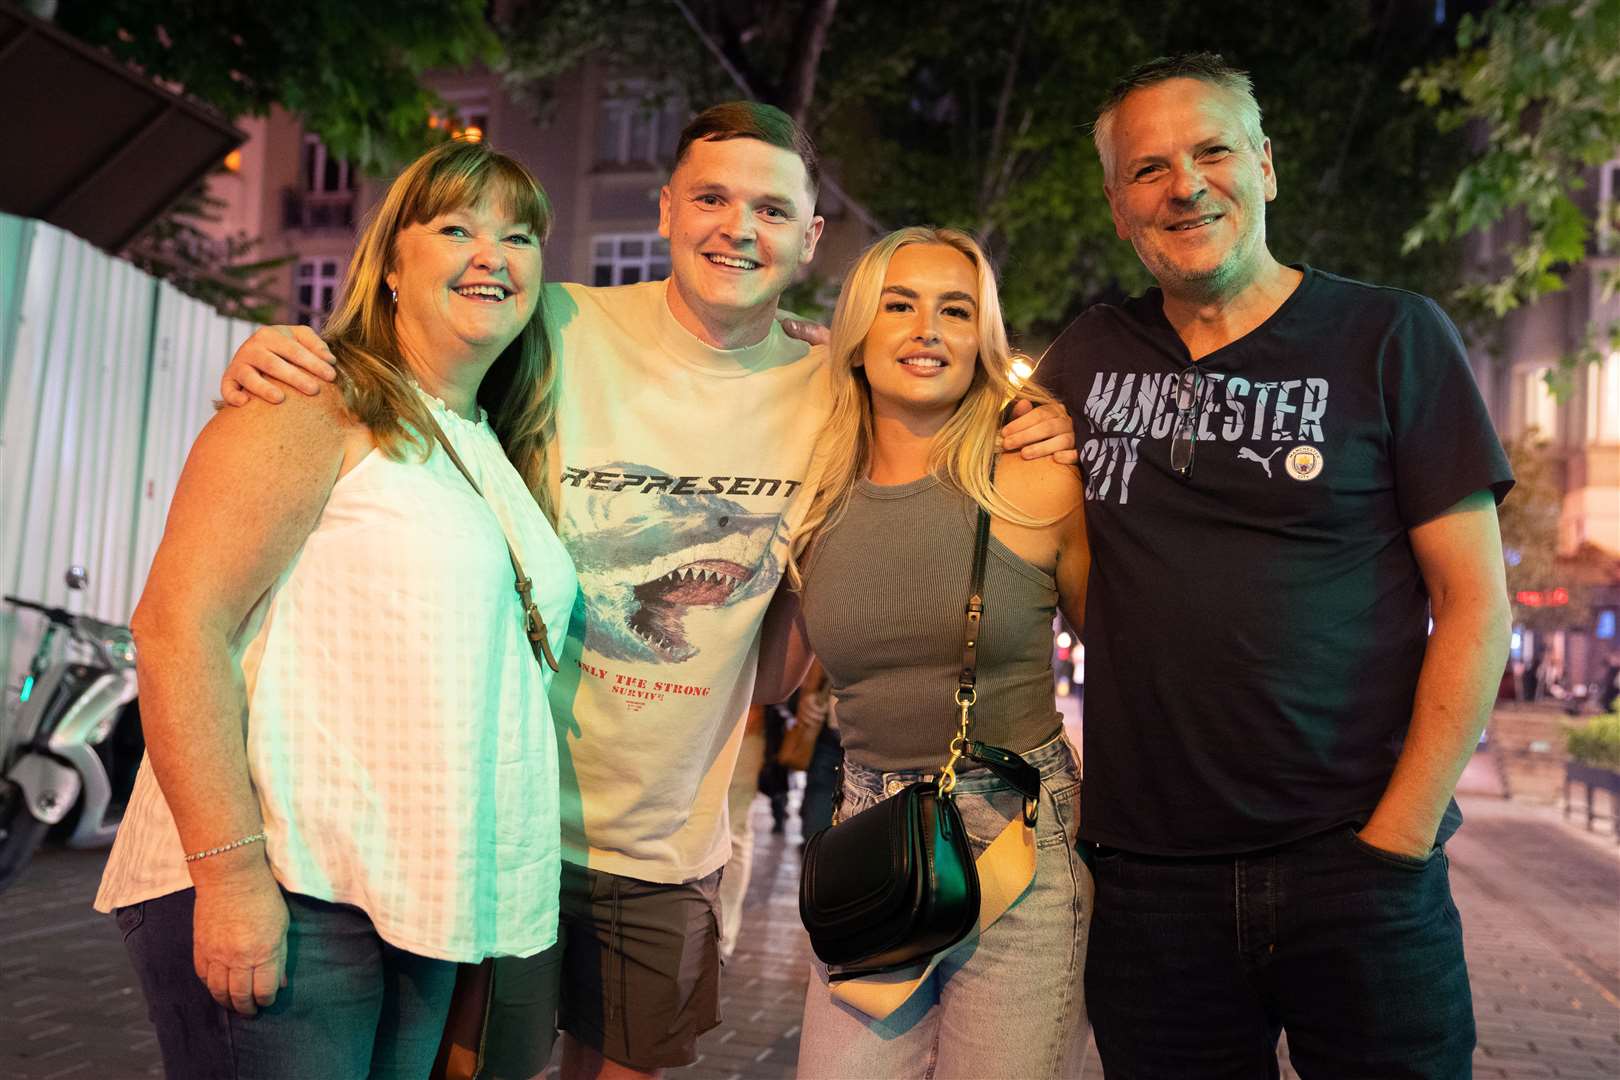 (left to right) Colette Howe, Sam Howe, Megan Hart and Mike Howe who are Man City fans outside the Dubliner in Istanbul (James MAnning/PA)